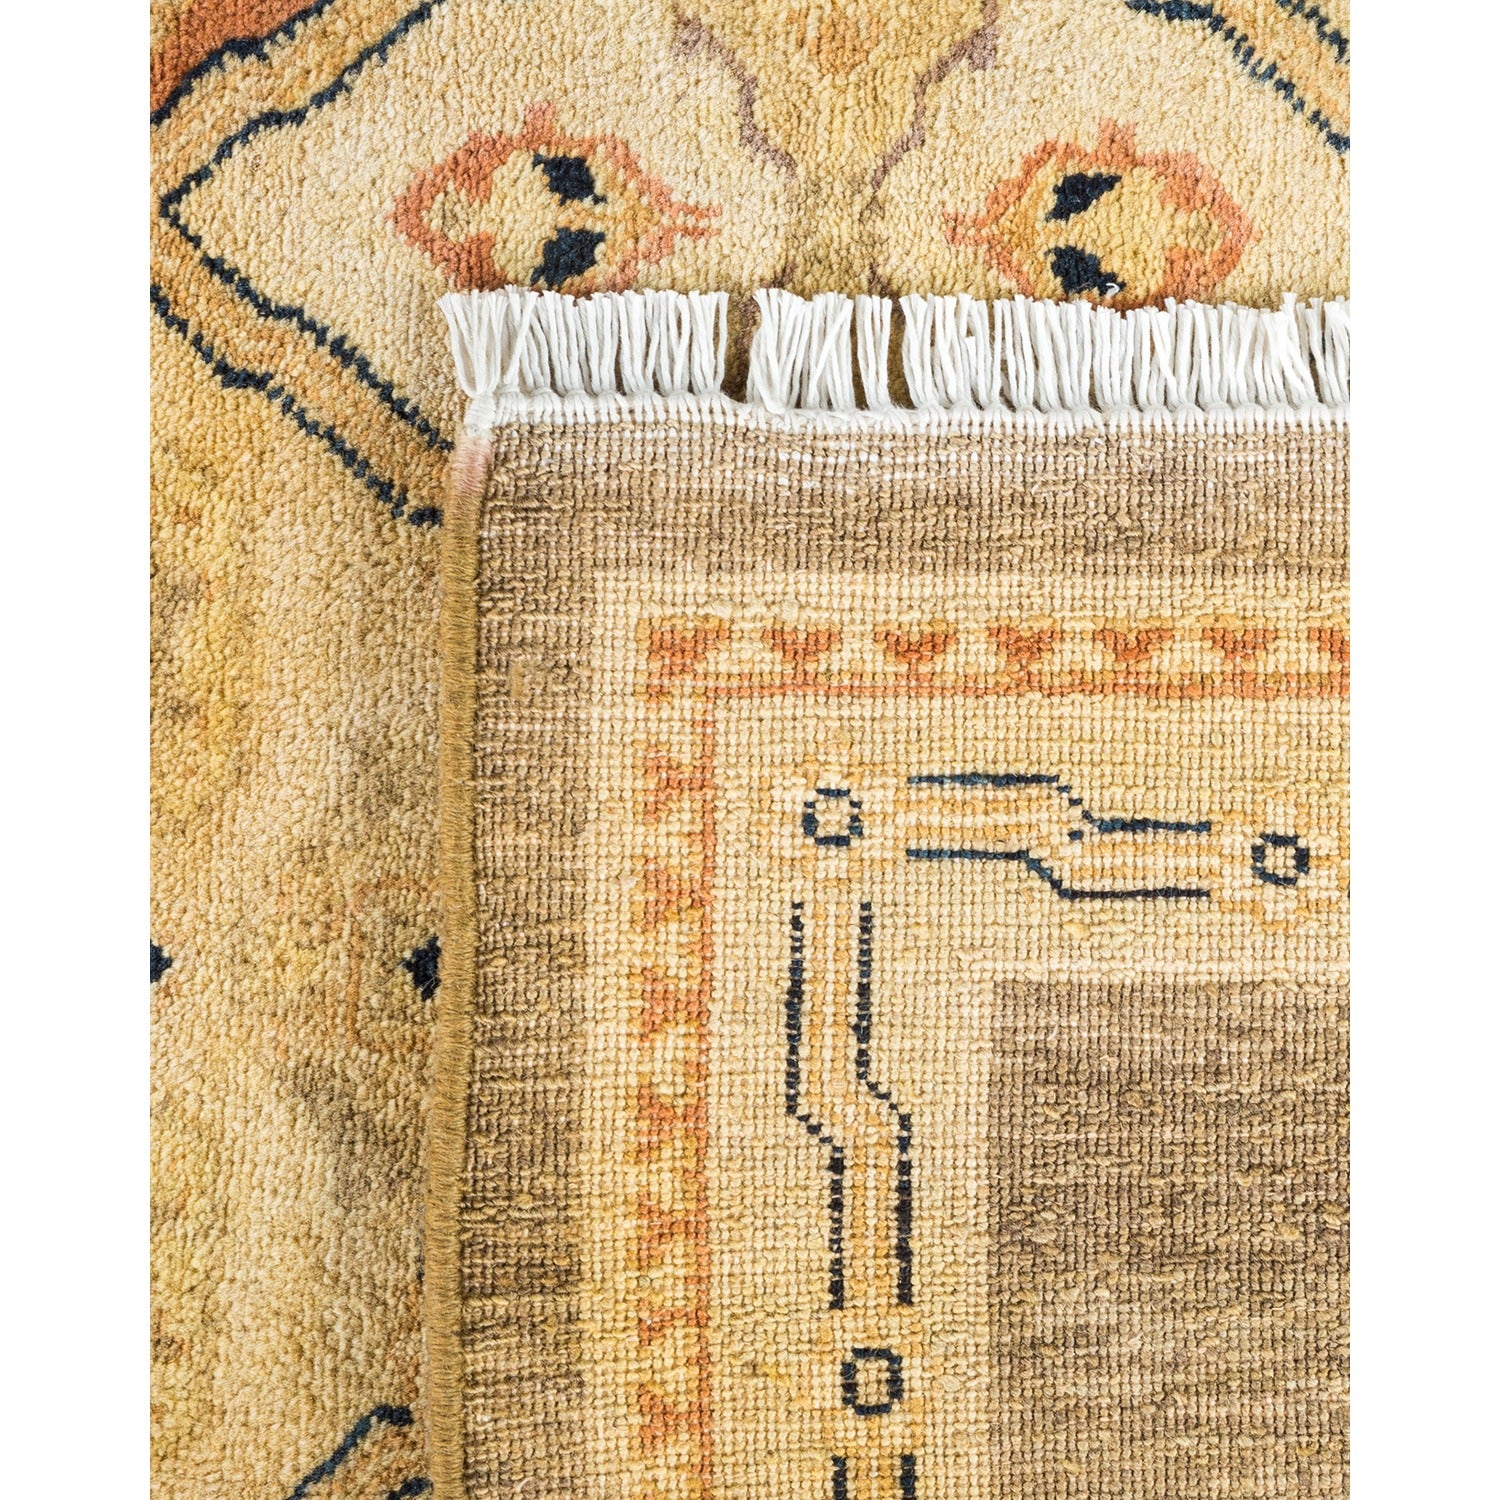 Intricate hand-woven rug with geometric patterns and vibrant colors.